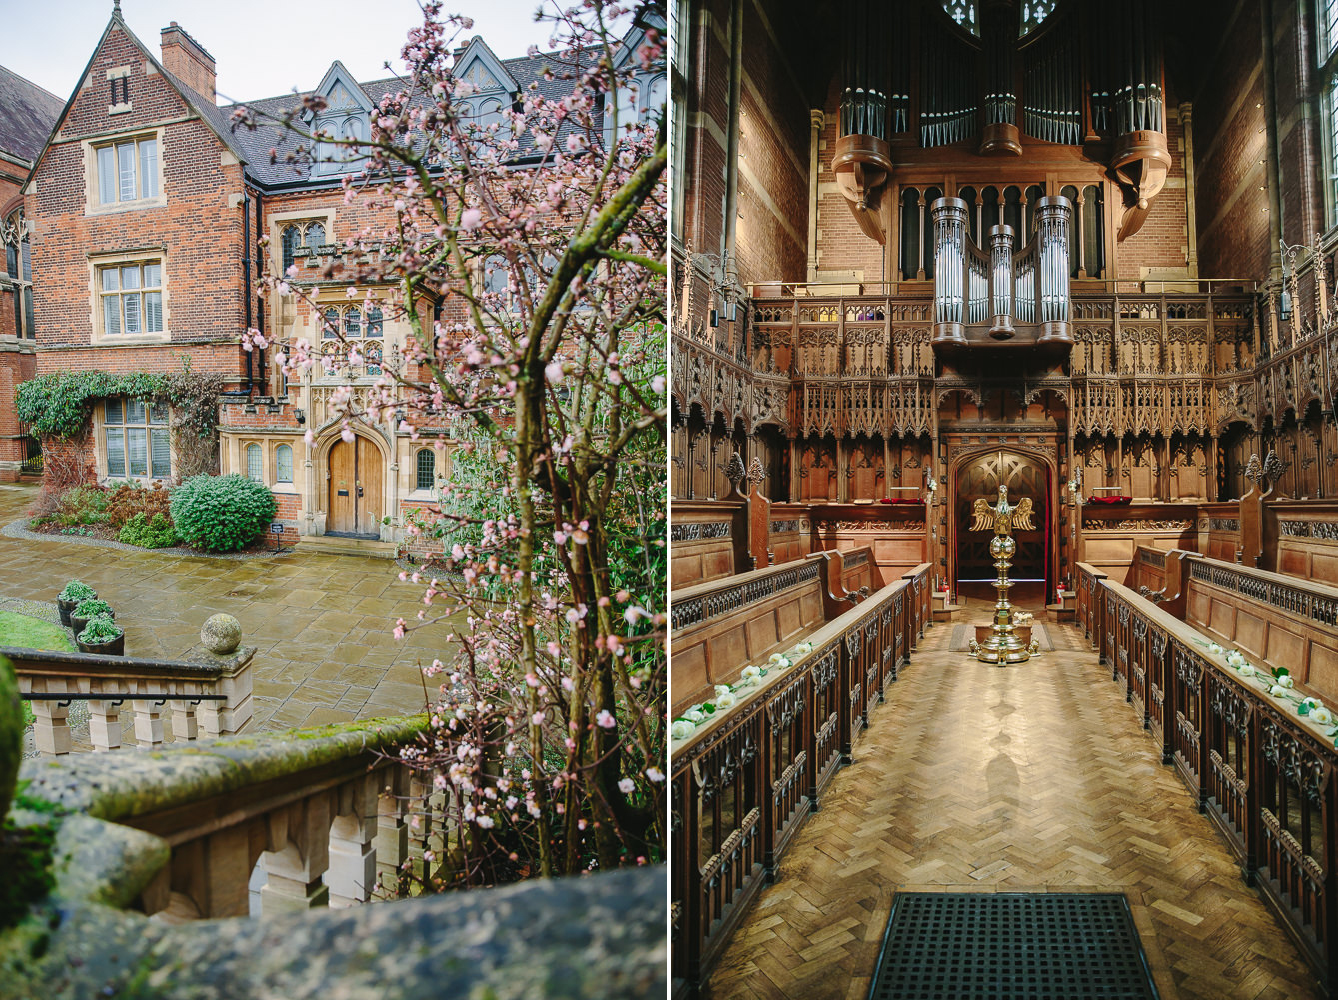 The Masters lodge and chapel interior at Cambridge University Selwyn College